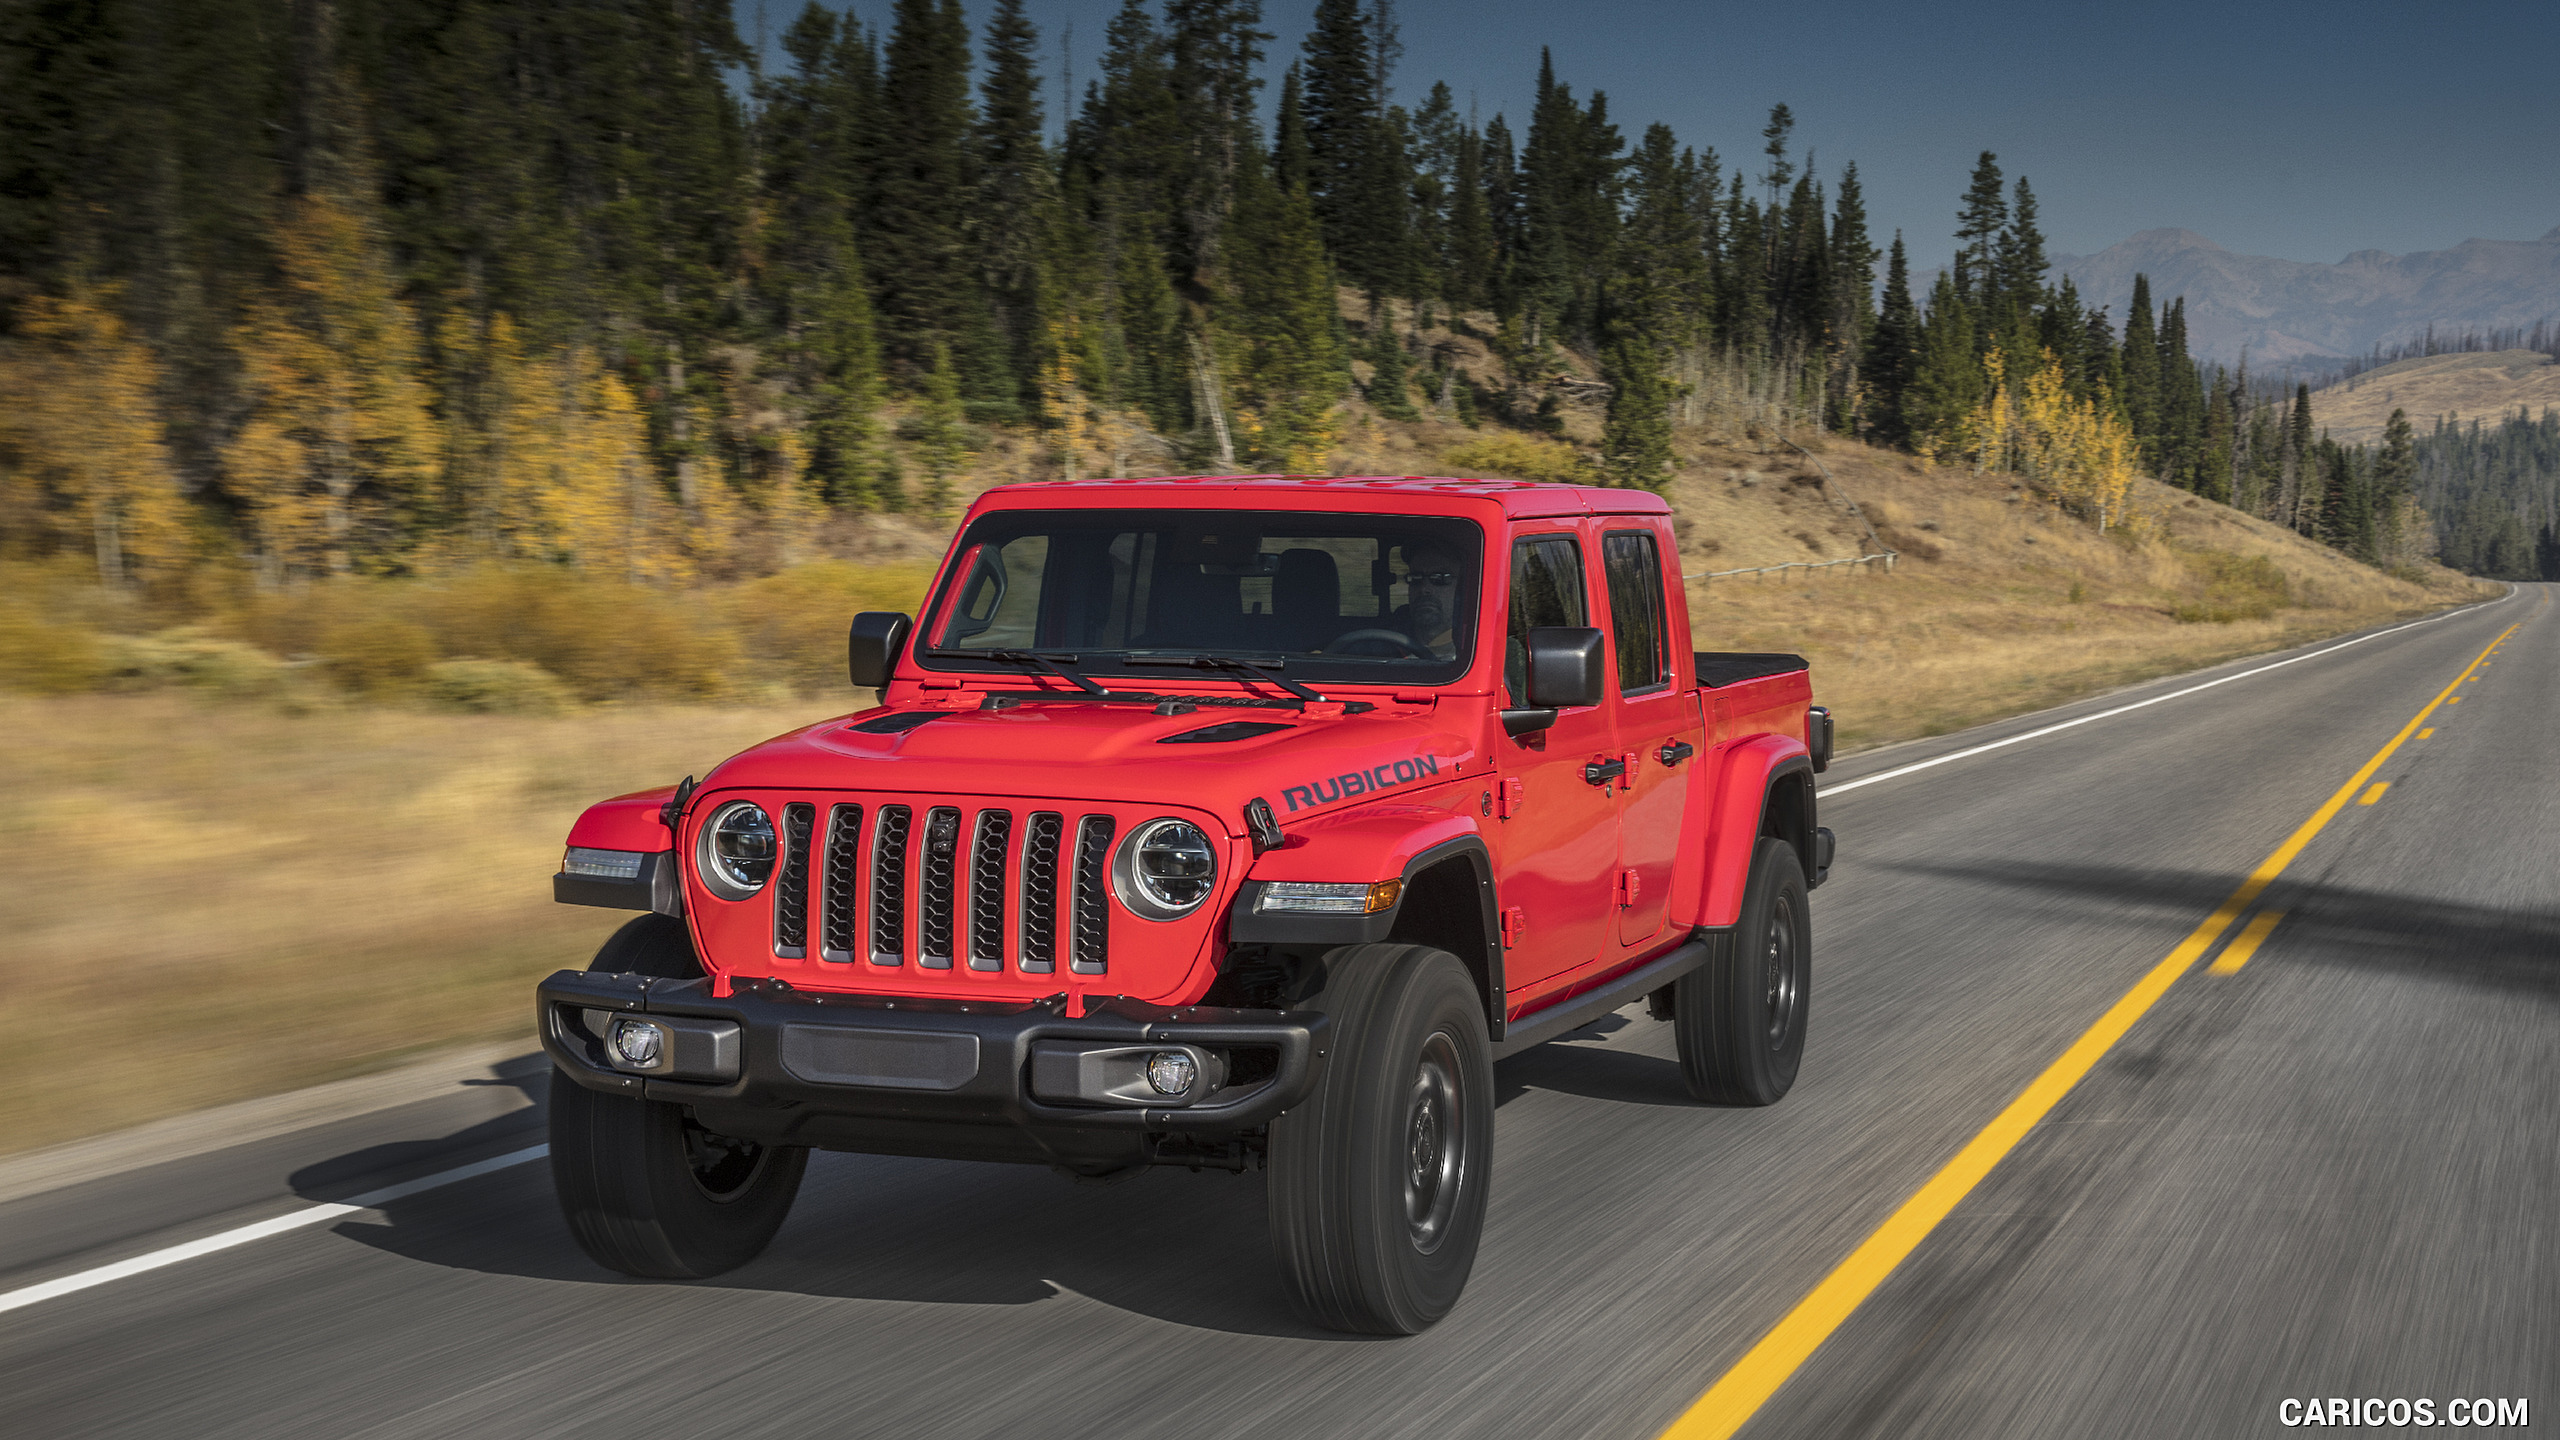 Free Download 2020 Jeep Gladiator Rubicon Front Hd Wallpaper 12 2560x1440 For Your Desktop Mobile Tablet Explore 51 Jeep Rubicon Gladiator Wallpapers Jeep Rubicon Gladiator Wallpapers Jeep Gladiator Wallpapers Gladiator Wallpaper